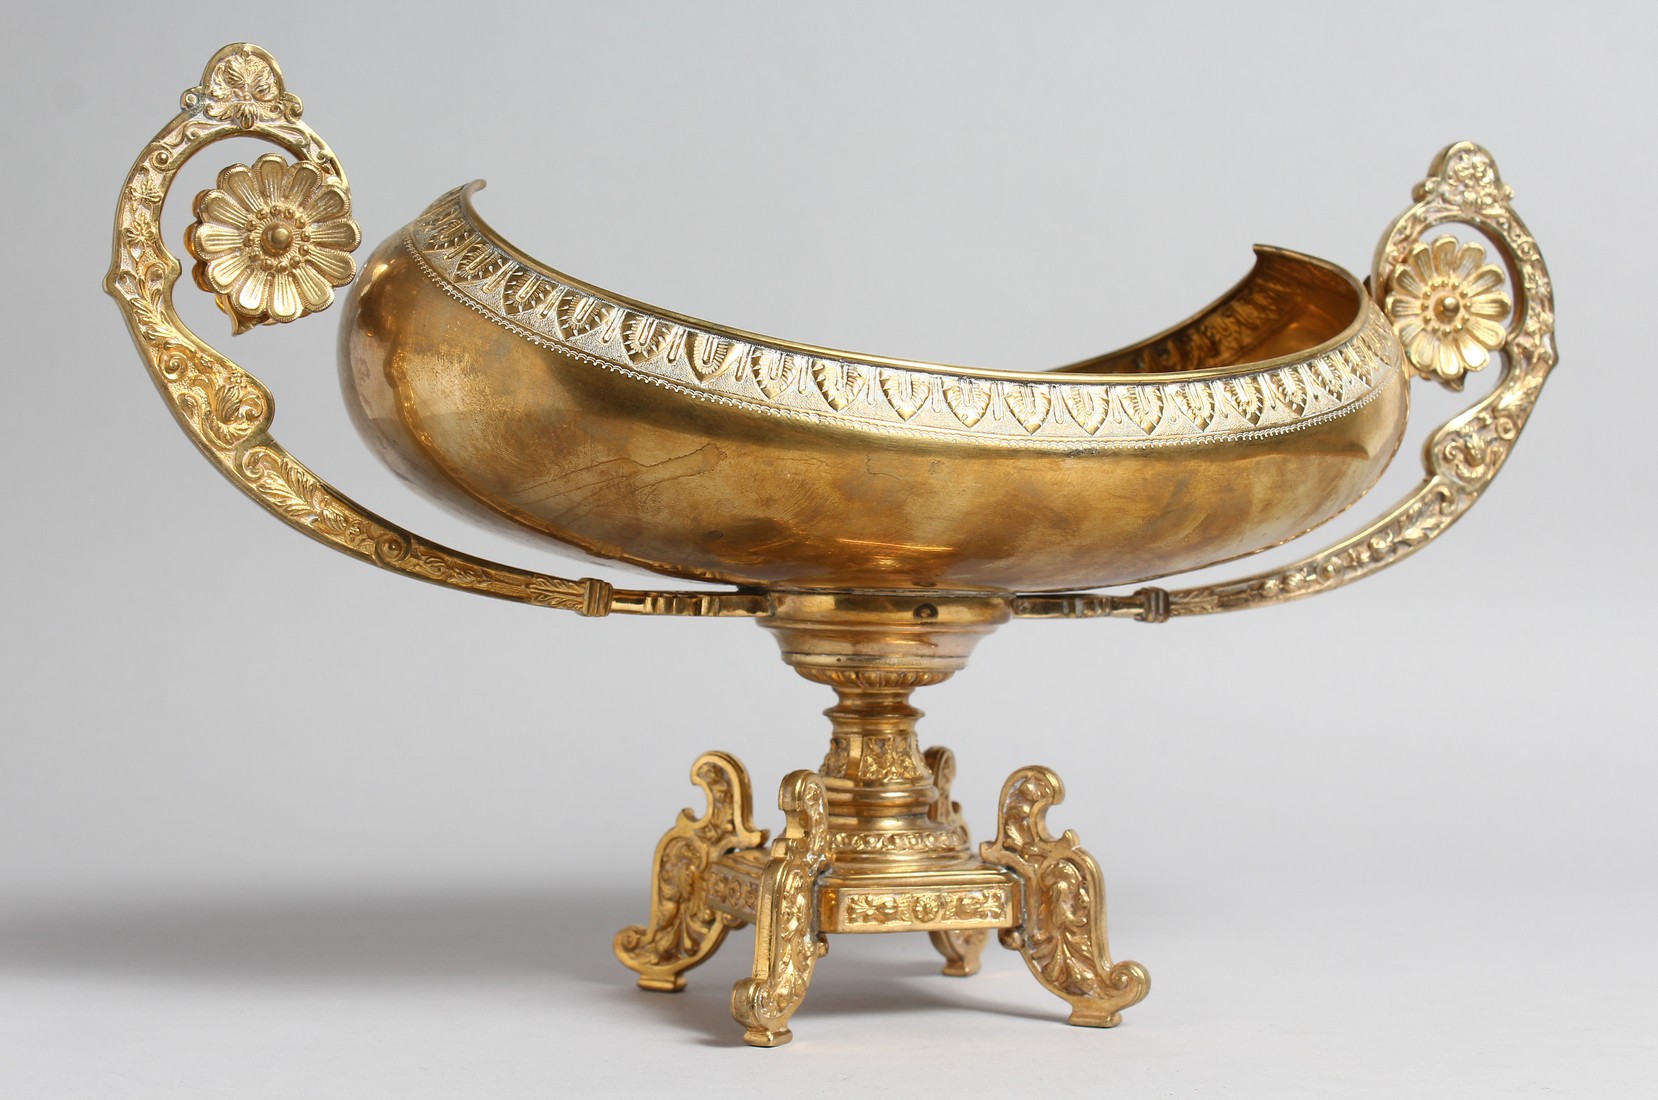 A DECORATIVE CLASSICAL STYLE GILT BRONZE TWIN HANDLED PEDESTAL OVAL SHAPE BOWL. 15.5ins high.